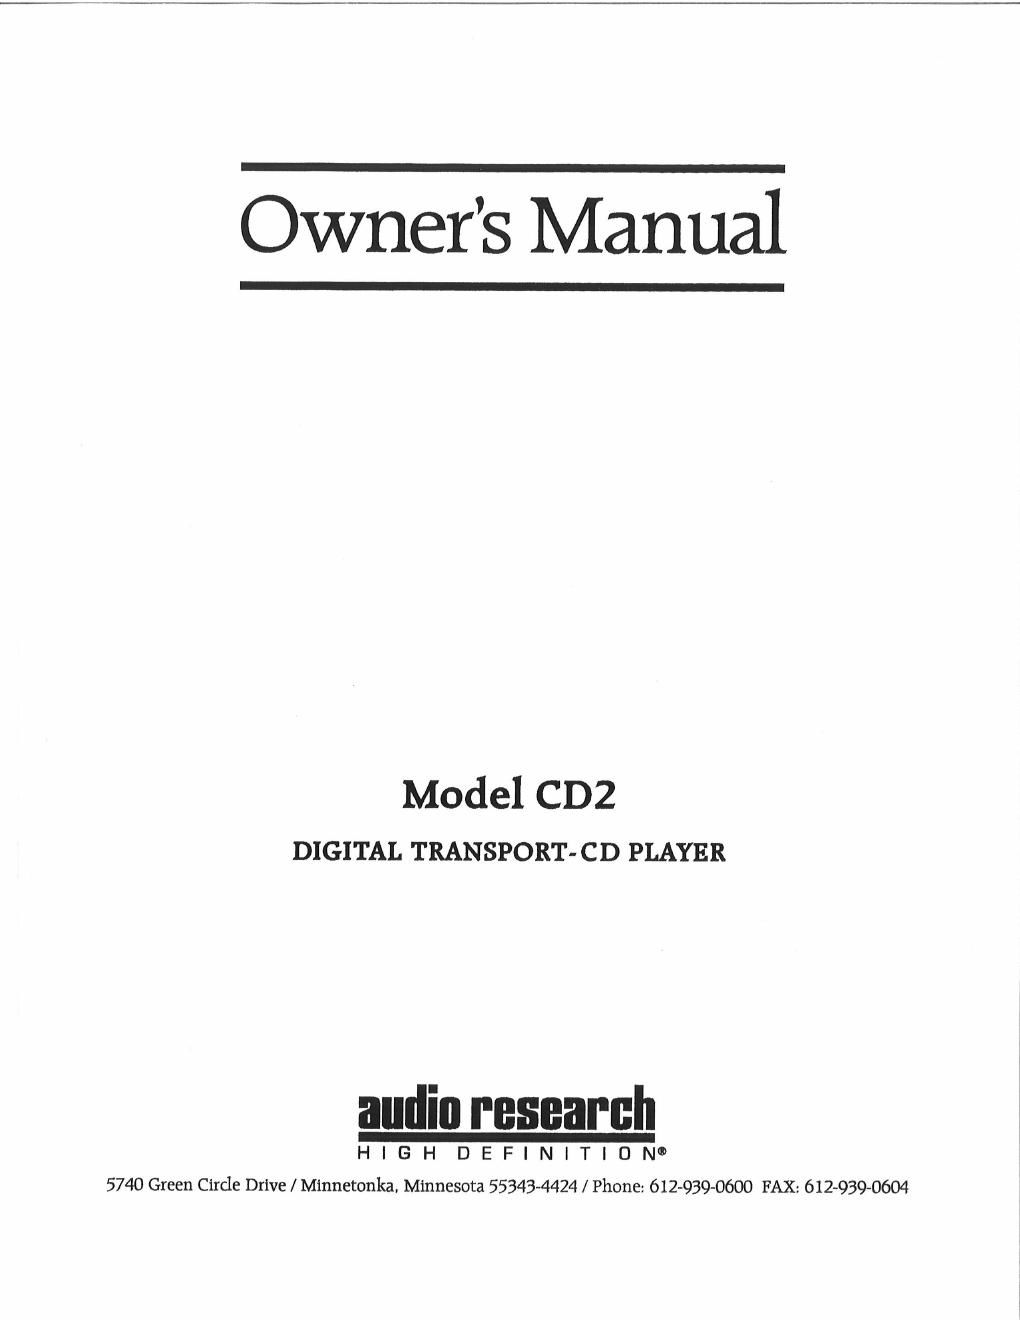 audio research cd 2 owners manual